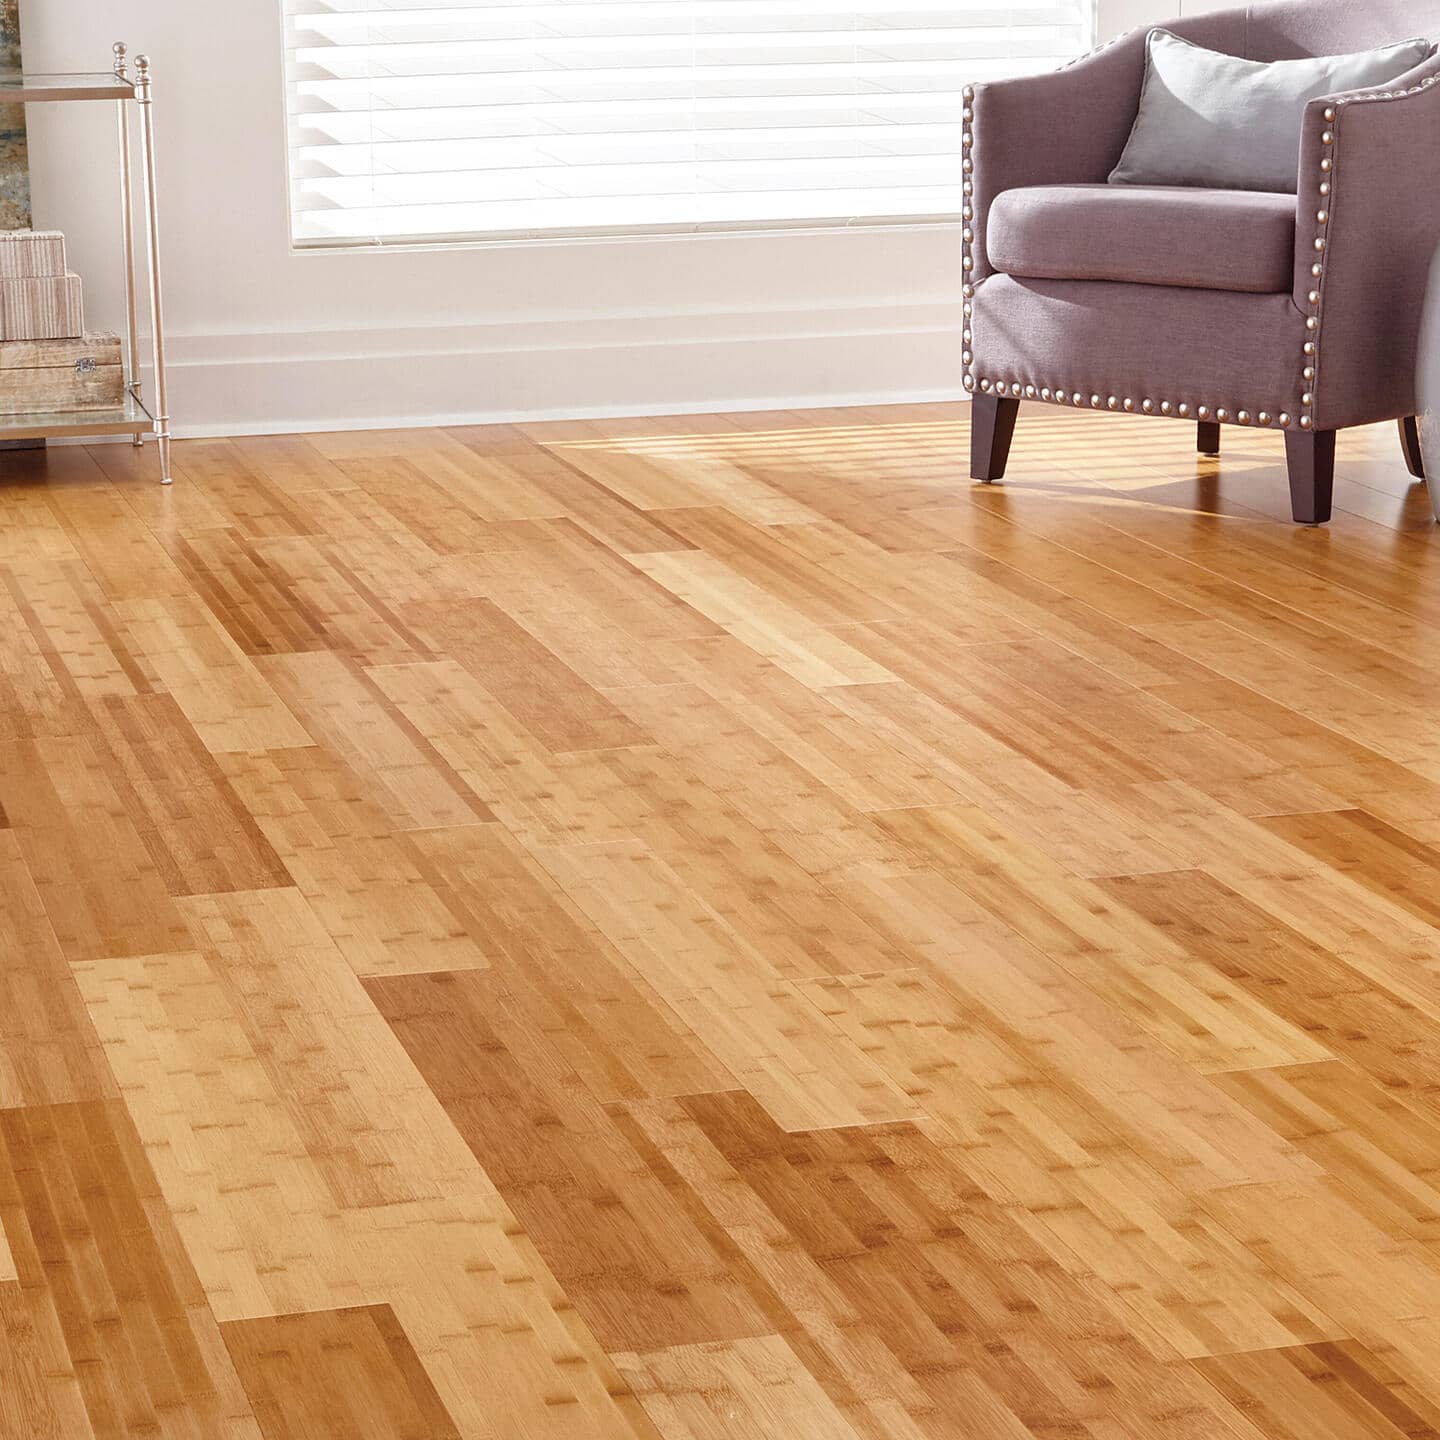 Timberwise wooden floors - Floor for life